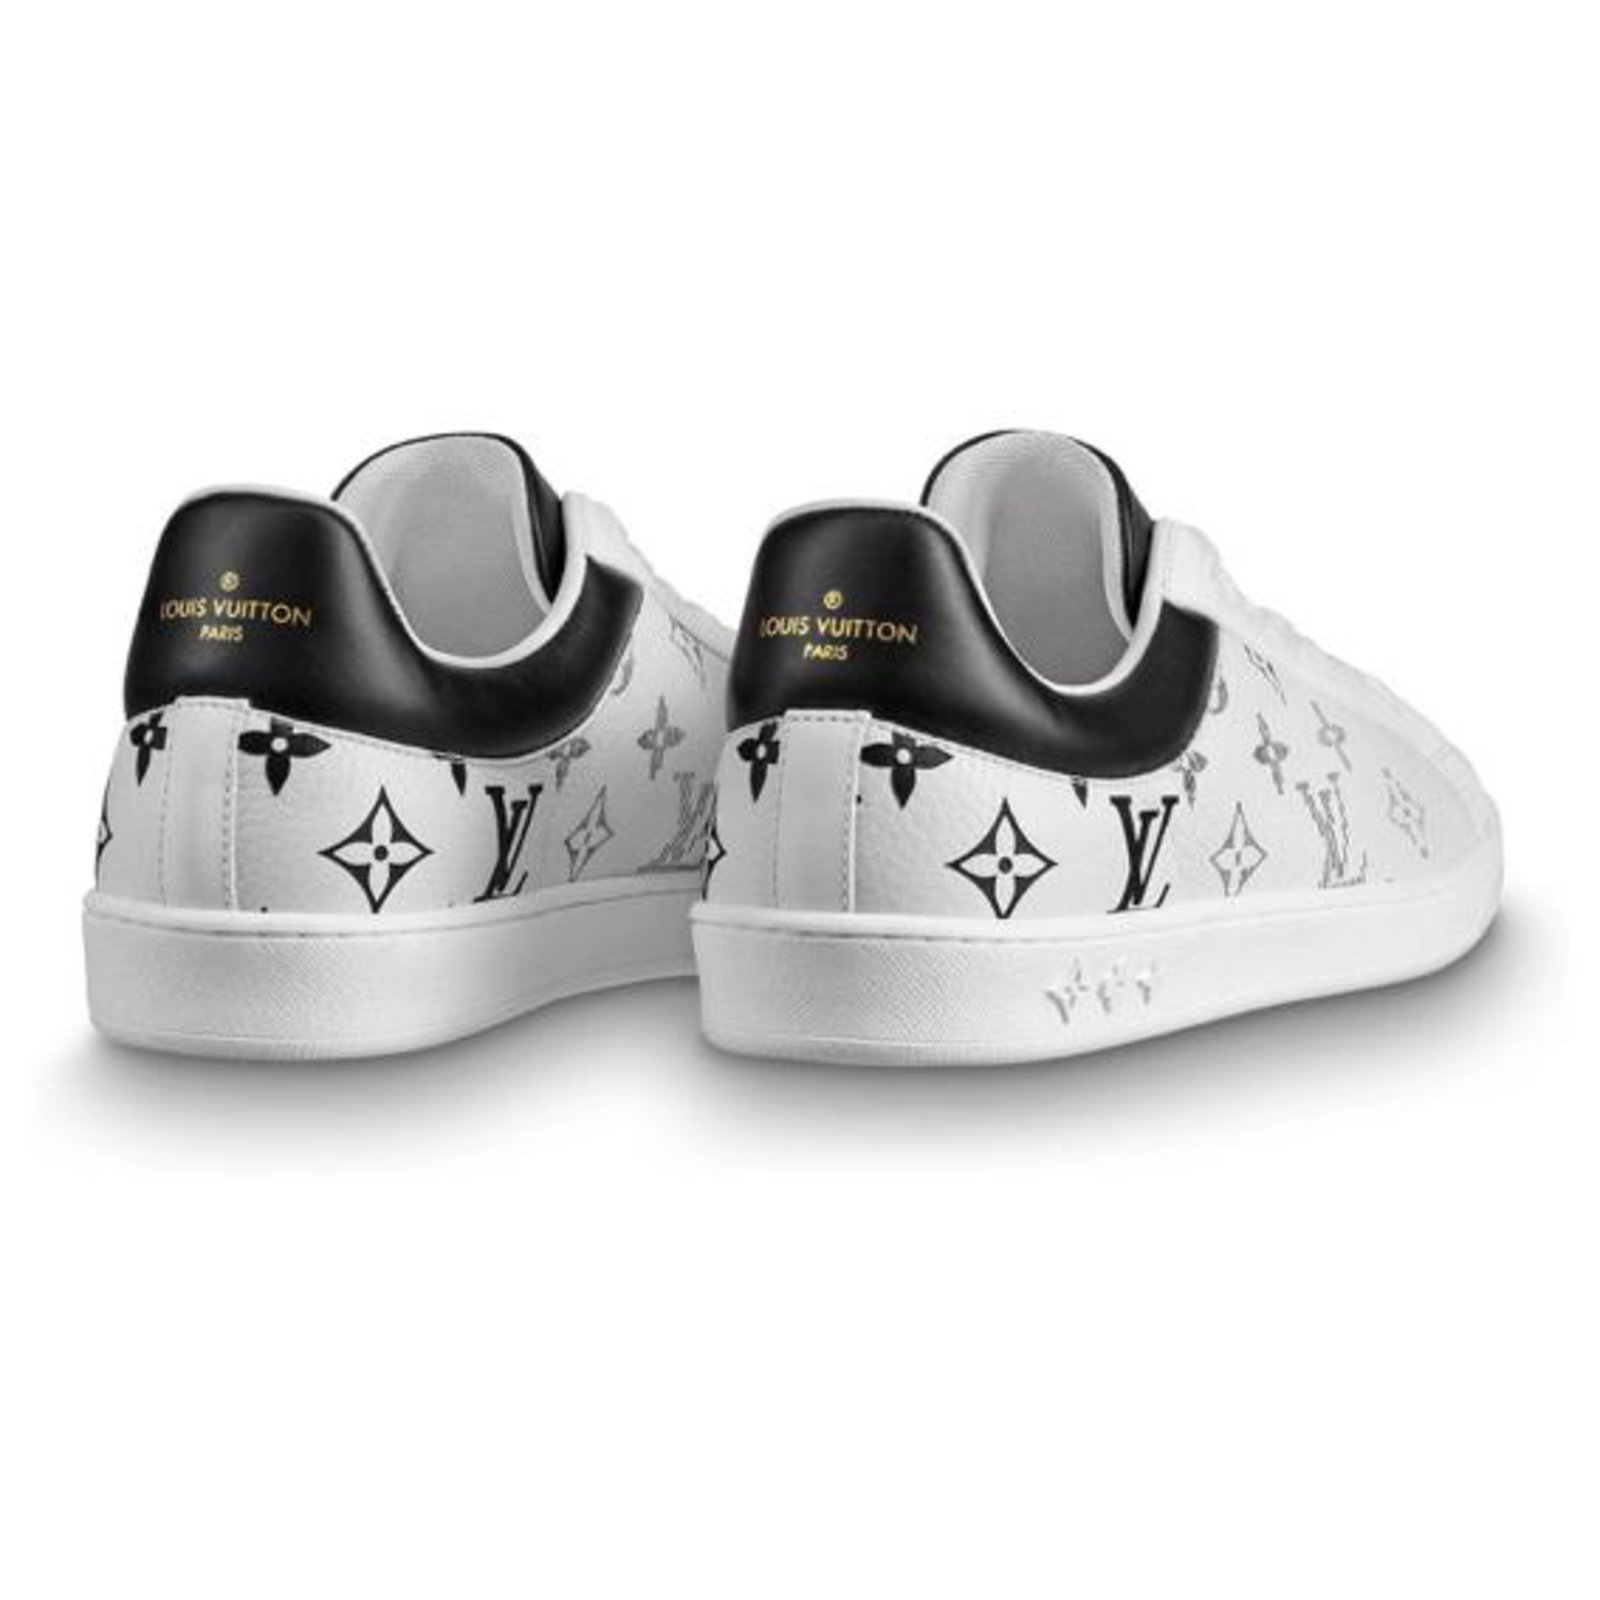 LV Luxembourg trainers new